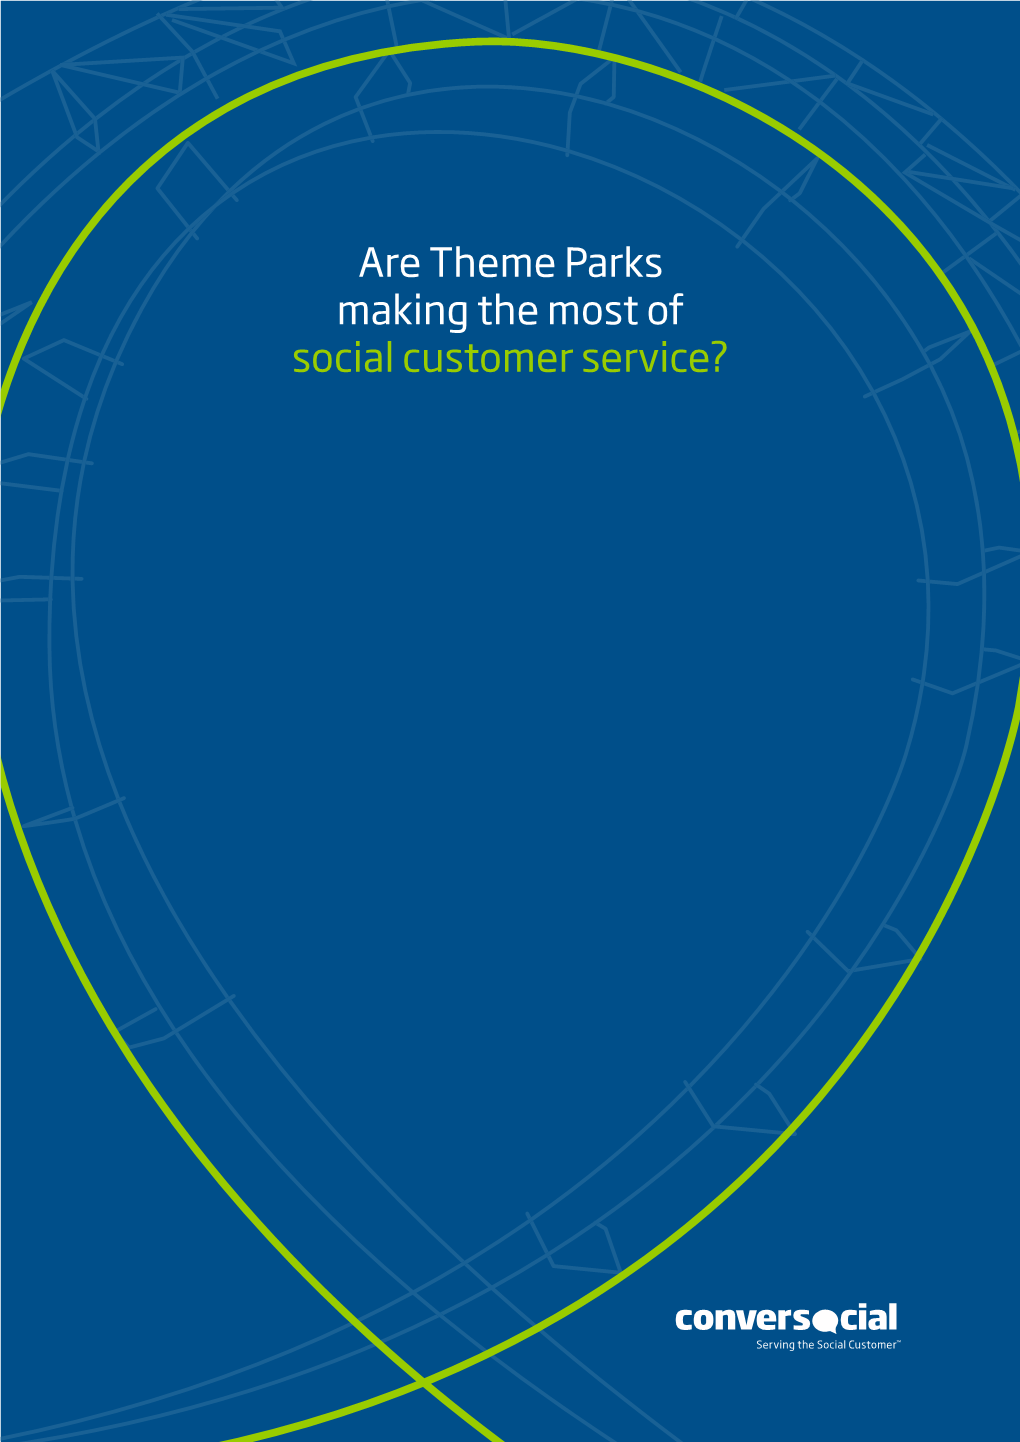 Are Theme Parks Making the Most of Social Customer Service? Introduction